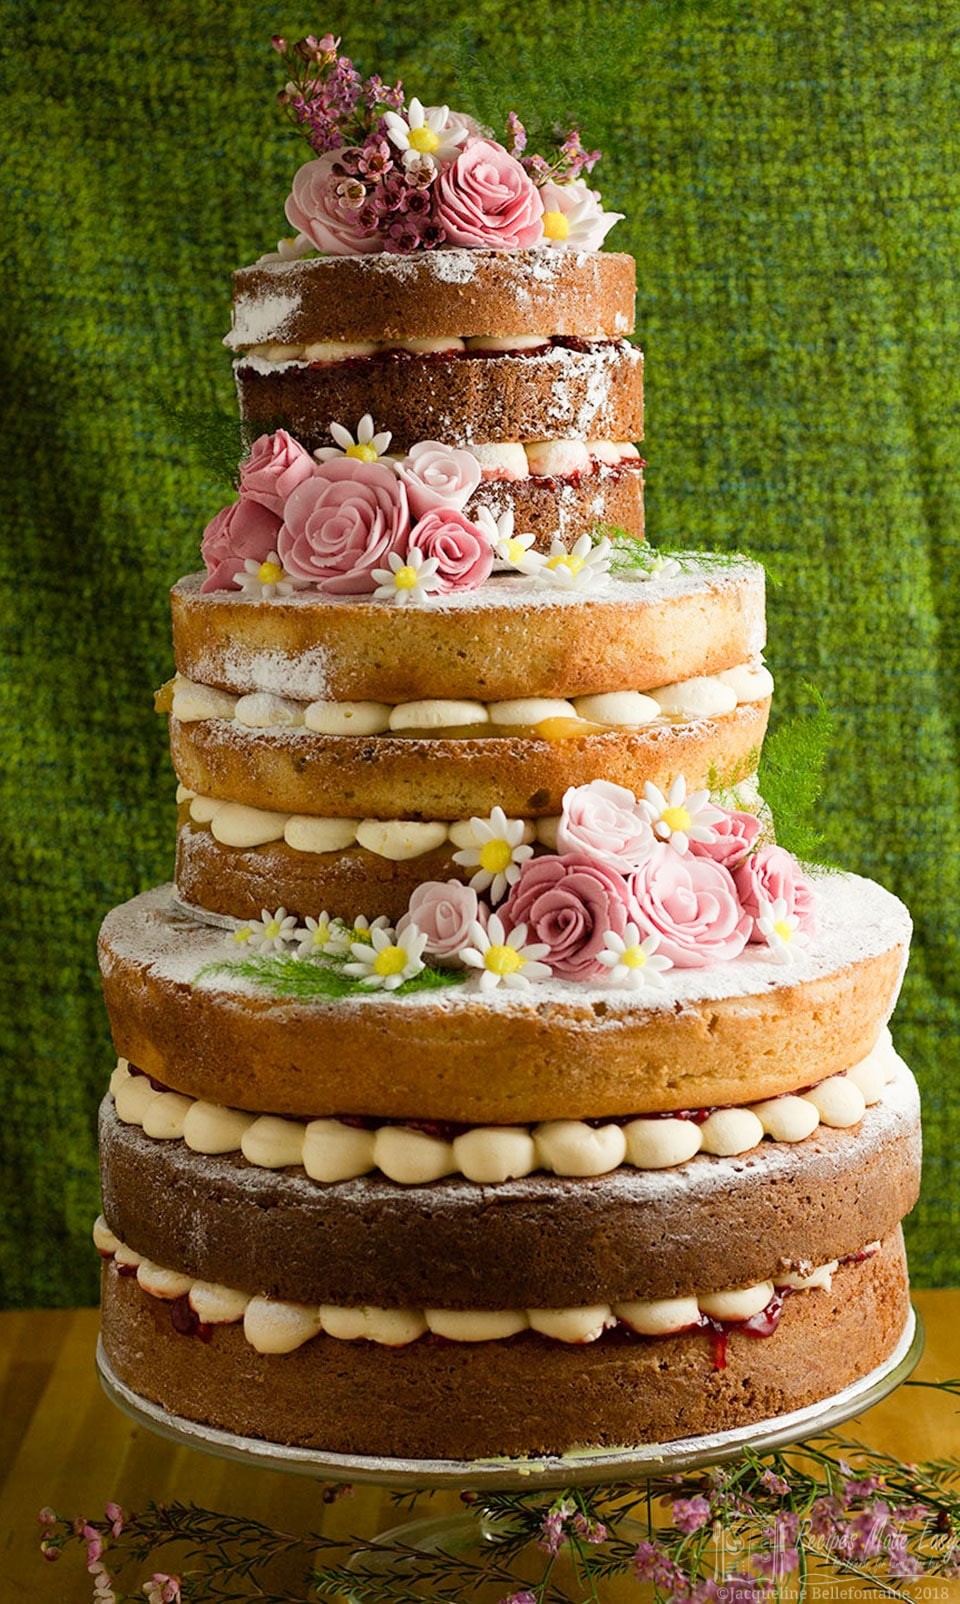 Semi-Naked Cake with Blueberries